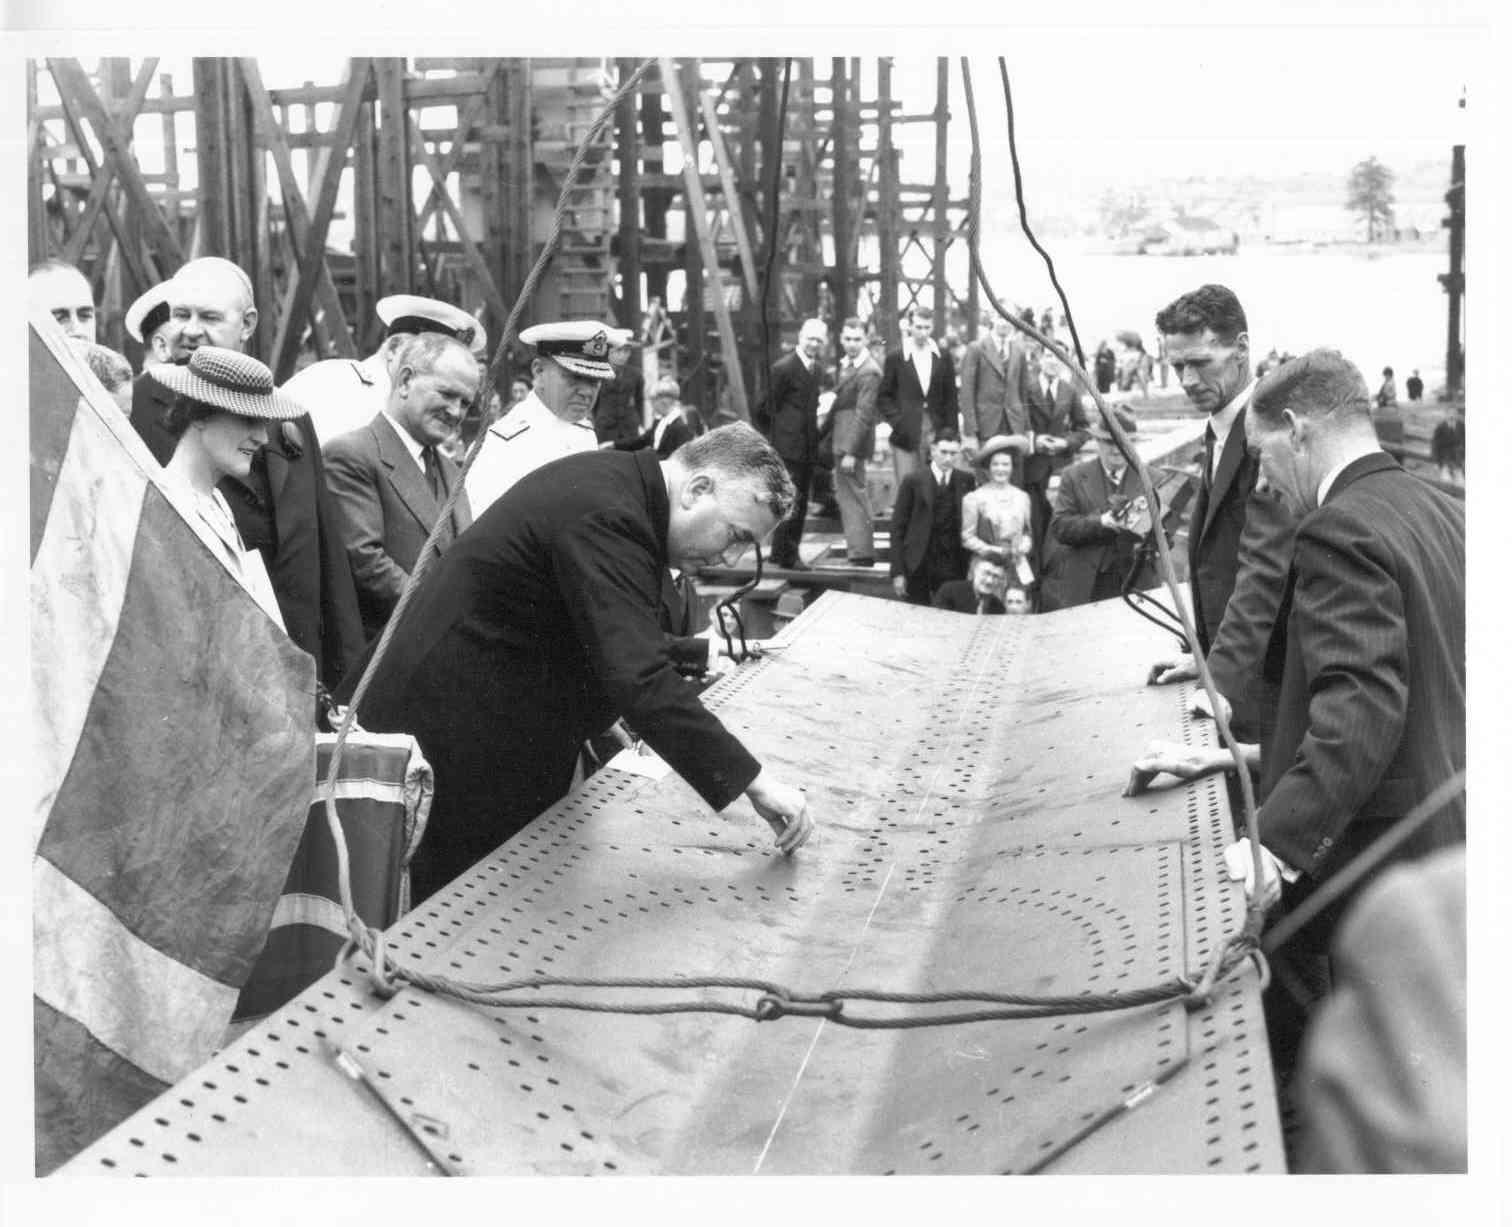 At Cockatoo Dockyard, Sydney, 16 February 1940, showing Mr. Menzies putting a rivet in the keel of ship under construction.